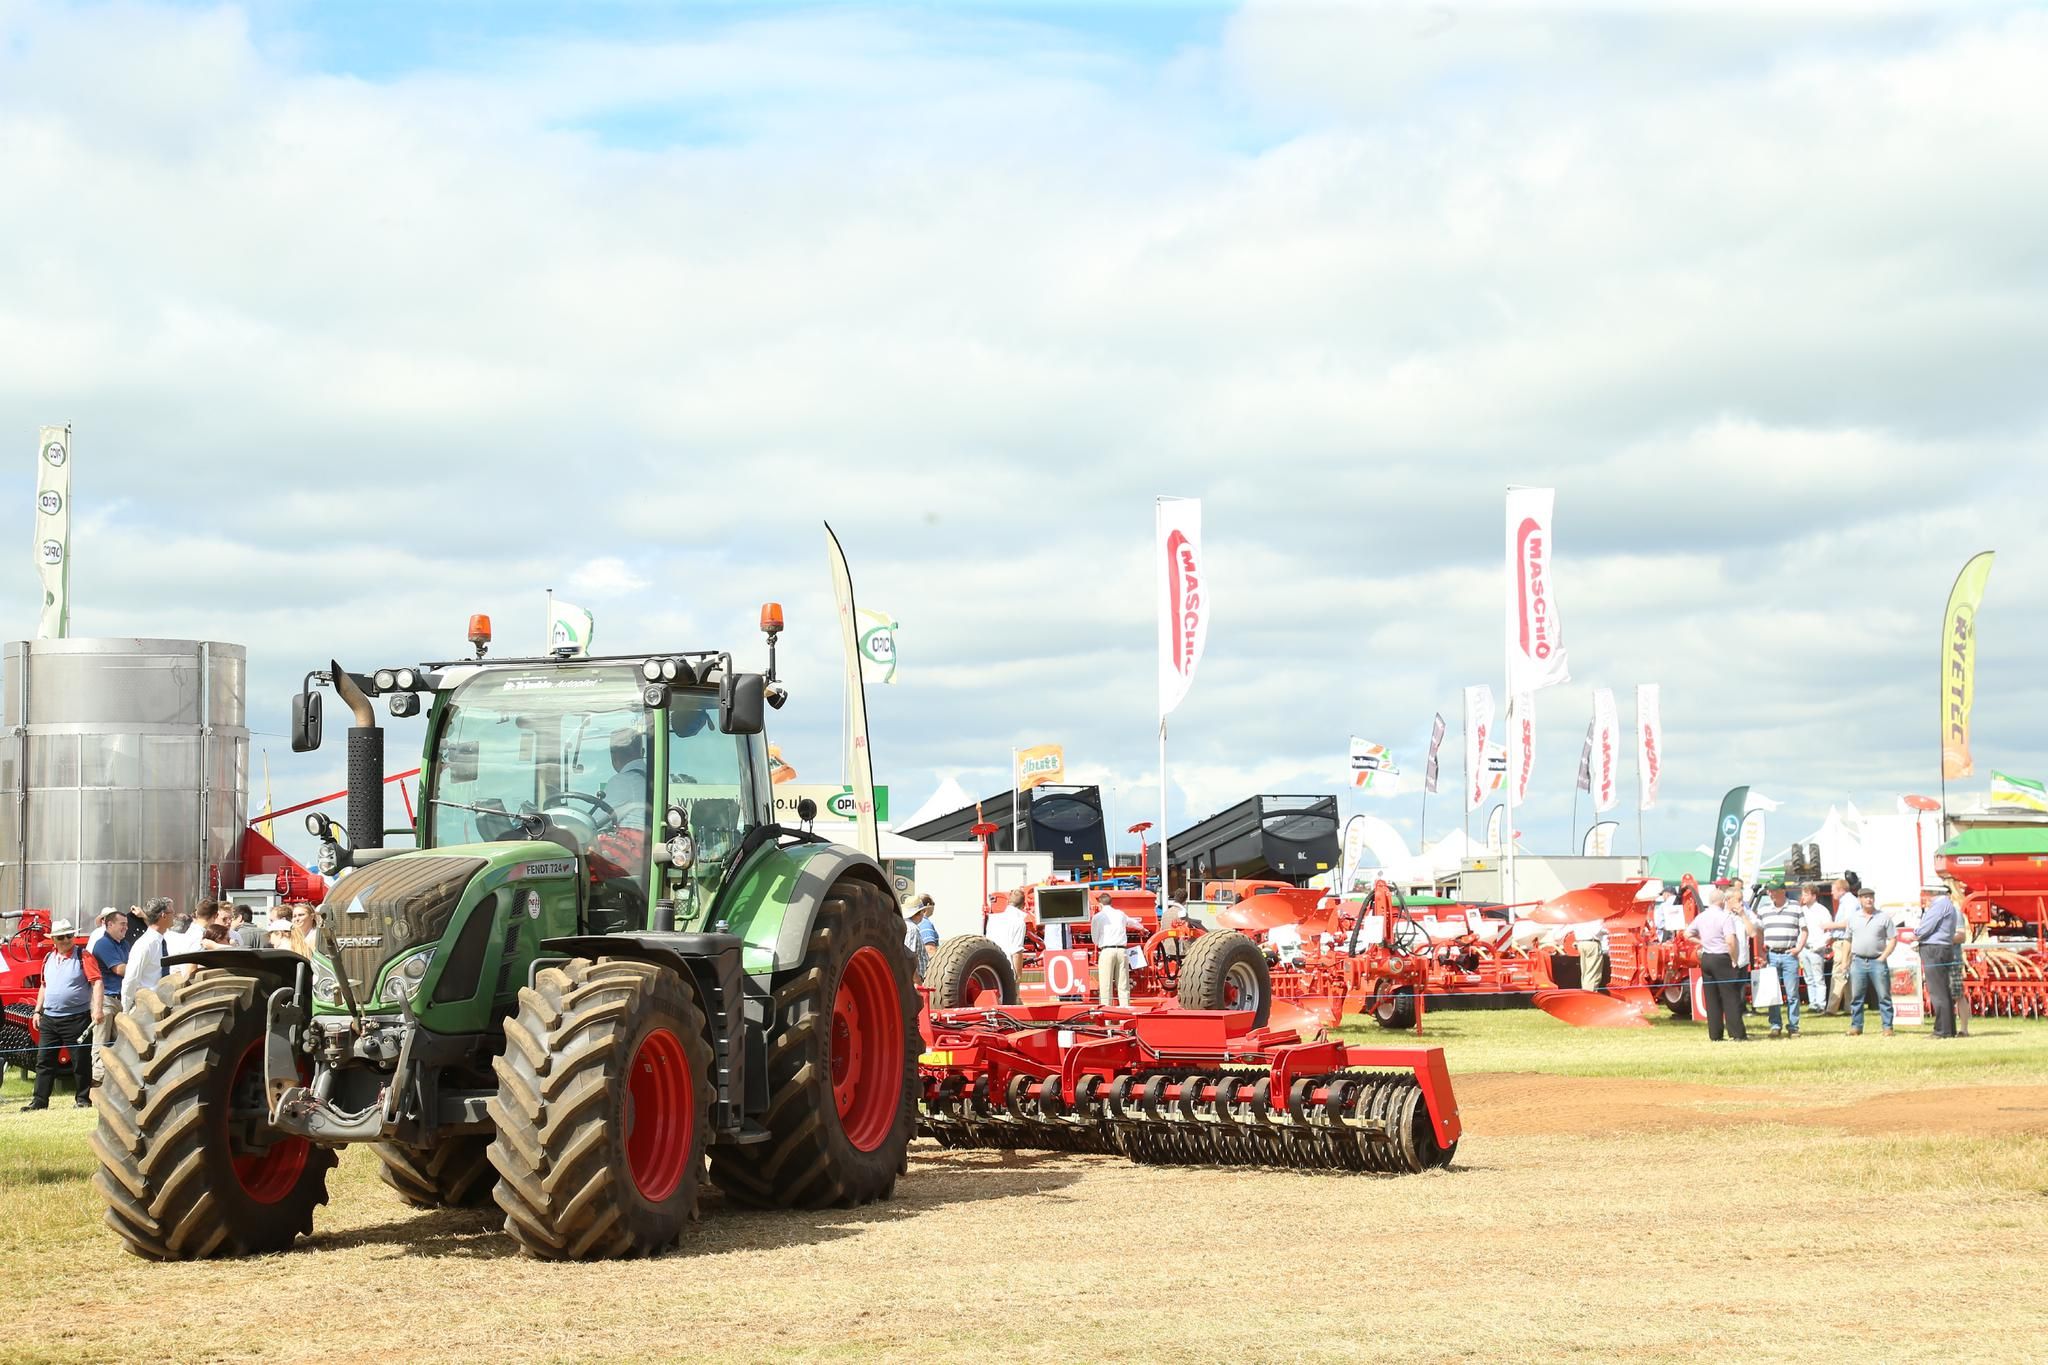 CEREALS 2019 THEMES ANNOUNCED